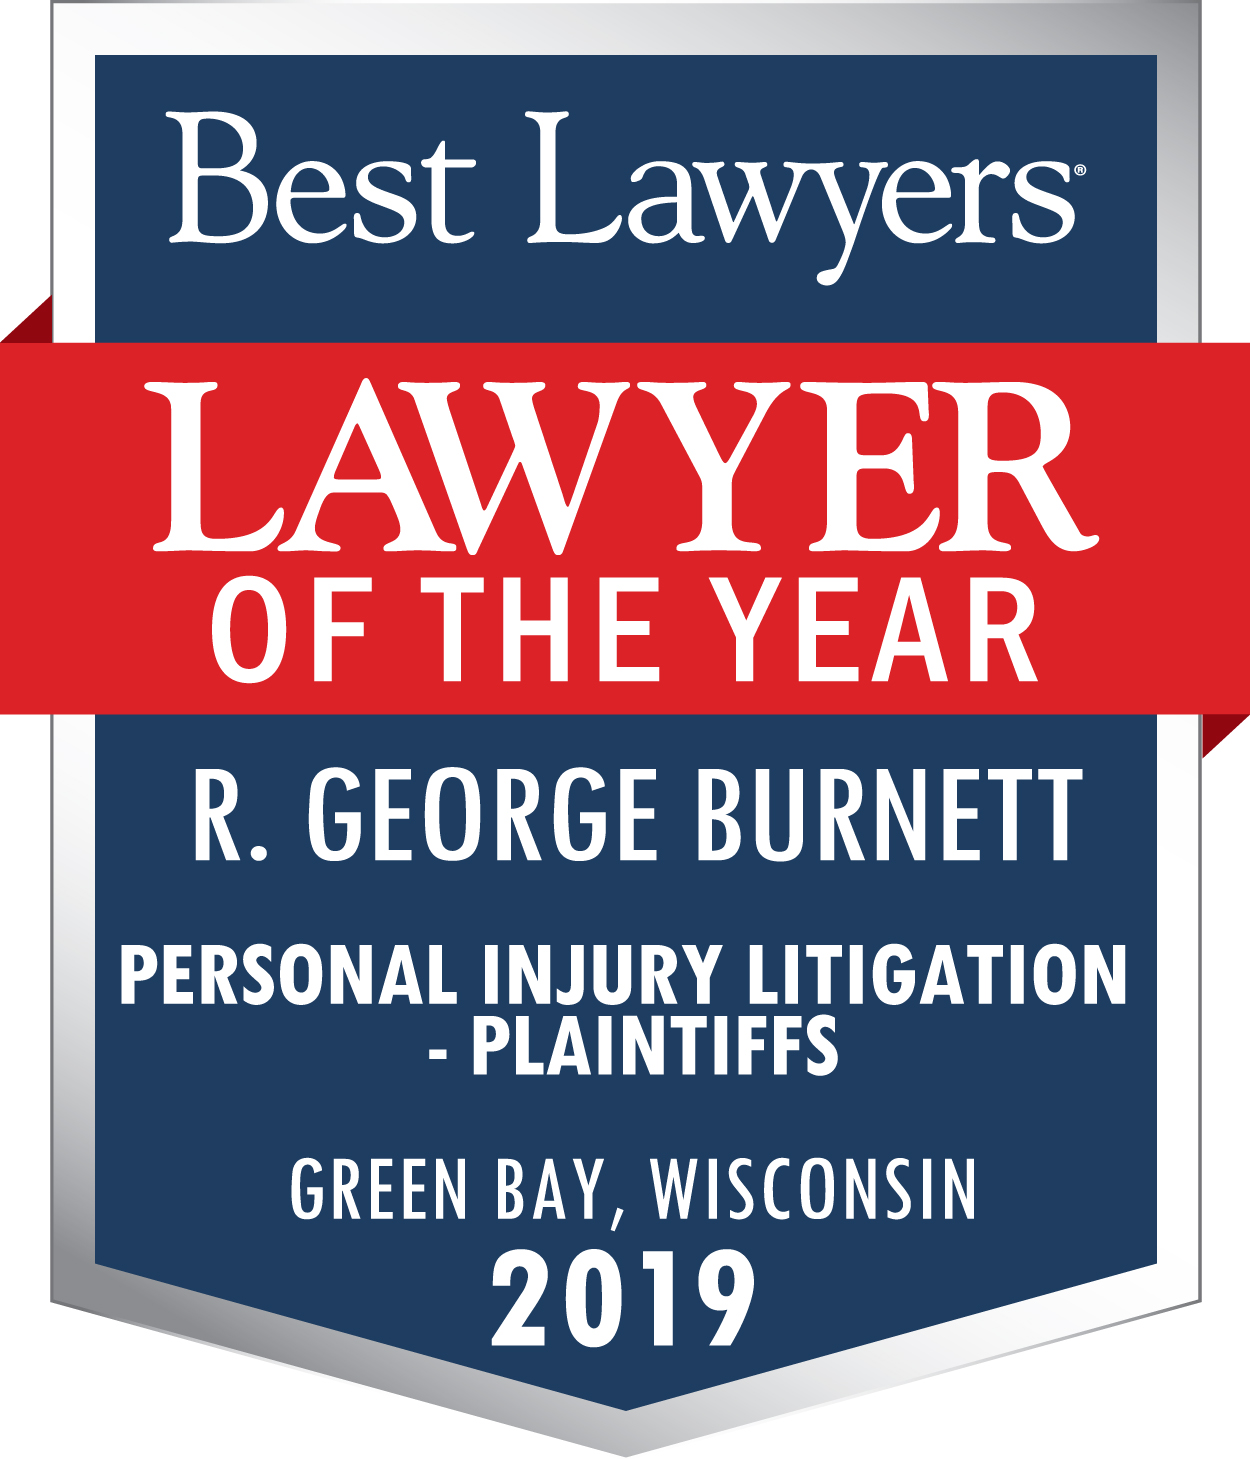 Best Lawyers 2019 Lawyer of the year award